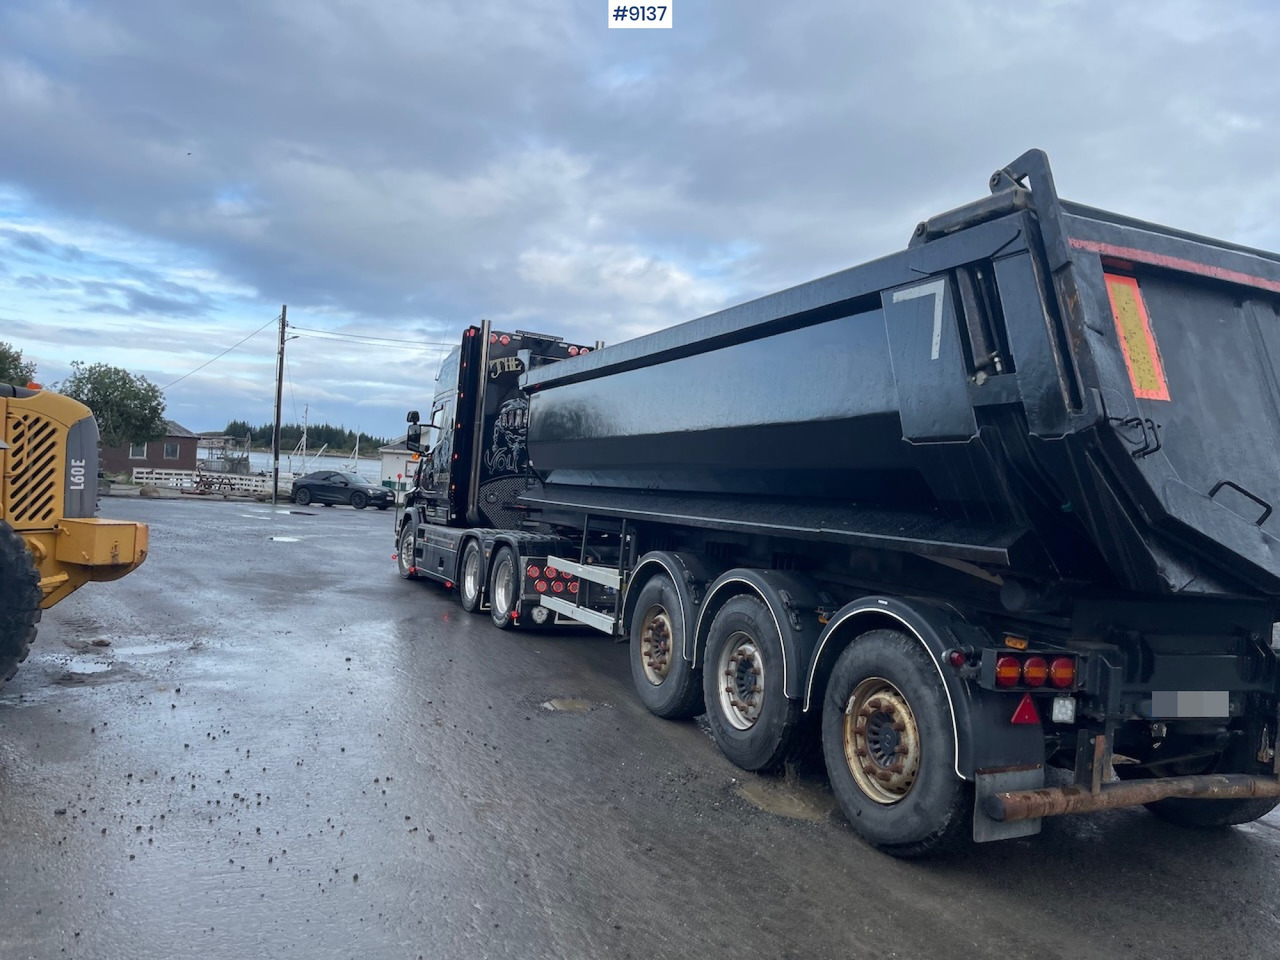 Leasing of  Carnehl tipping semi trailer in good condition Carnehl tipping semi trailer in good condition: picture 9